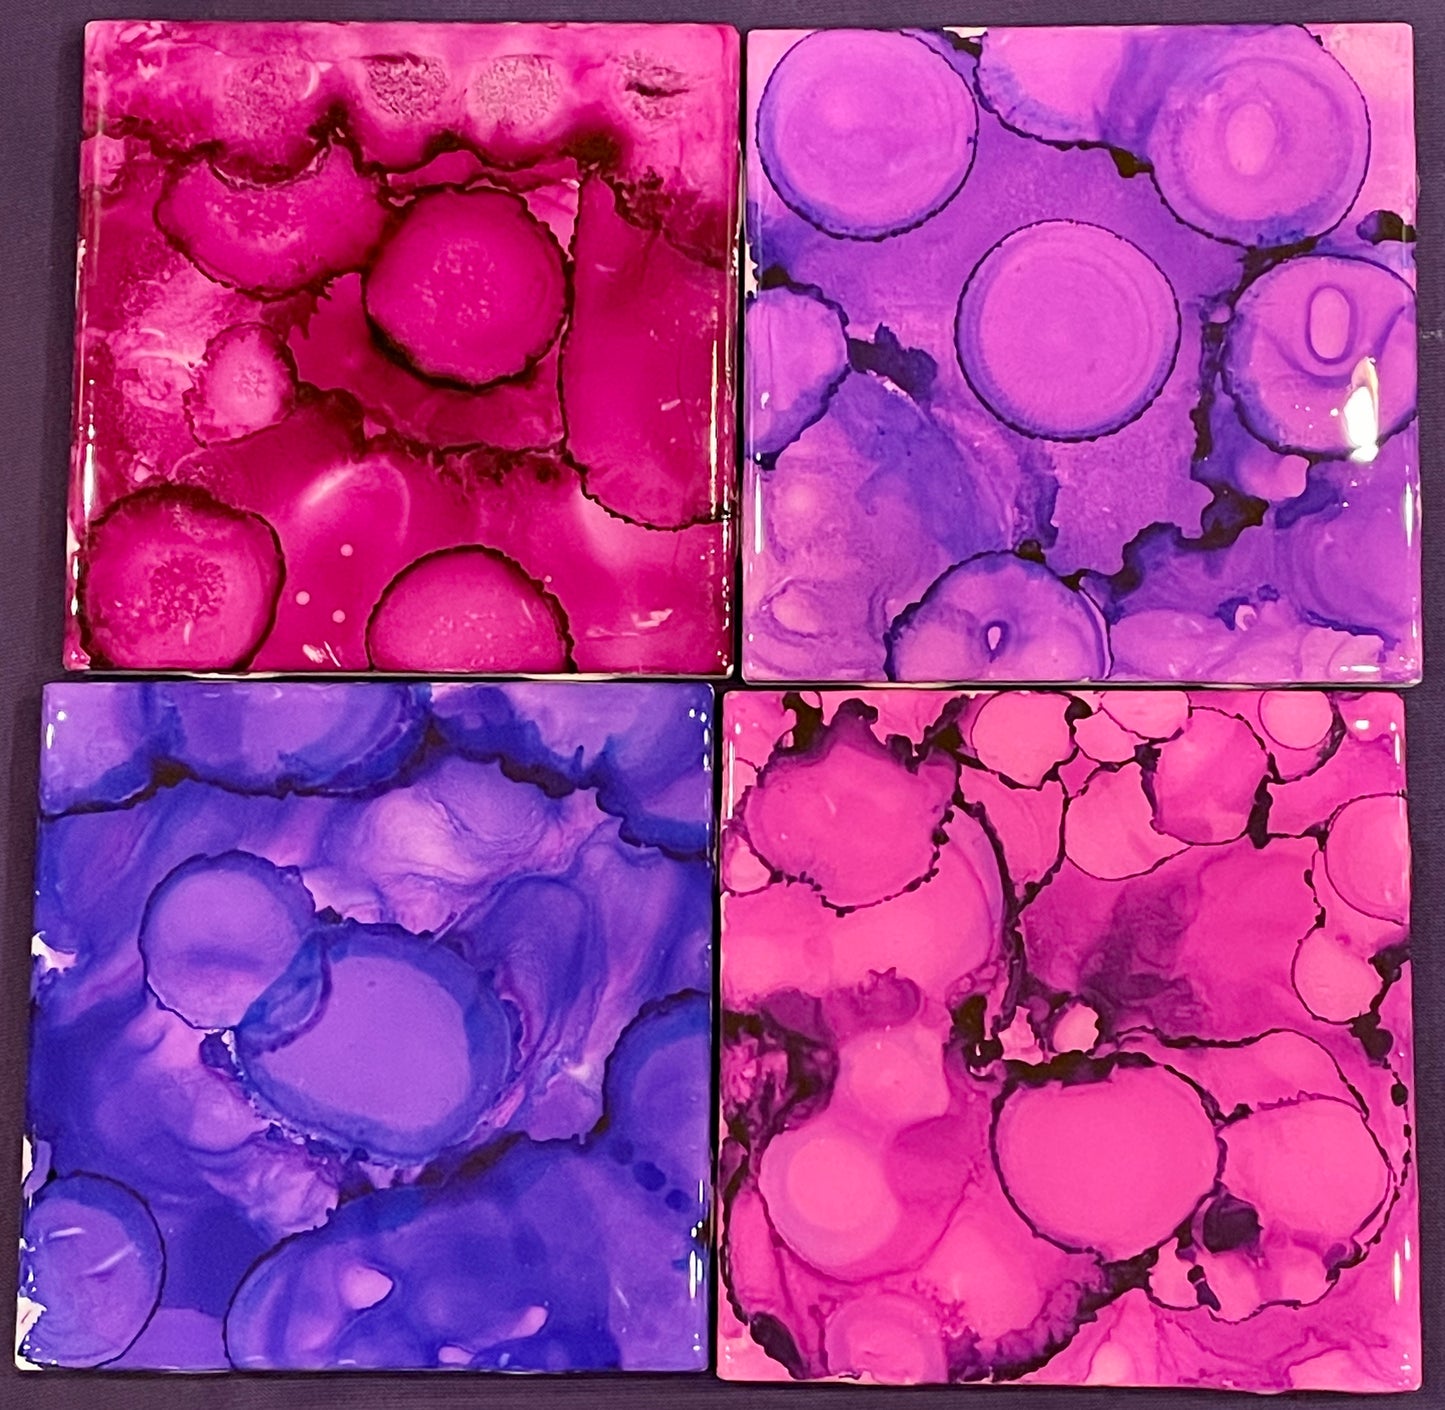 Abstract Painted Coaster Sets